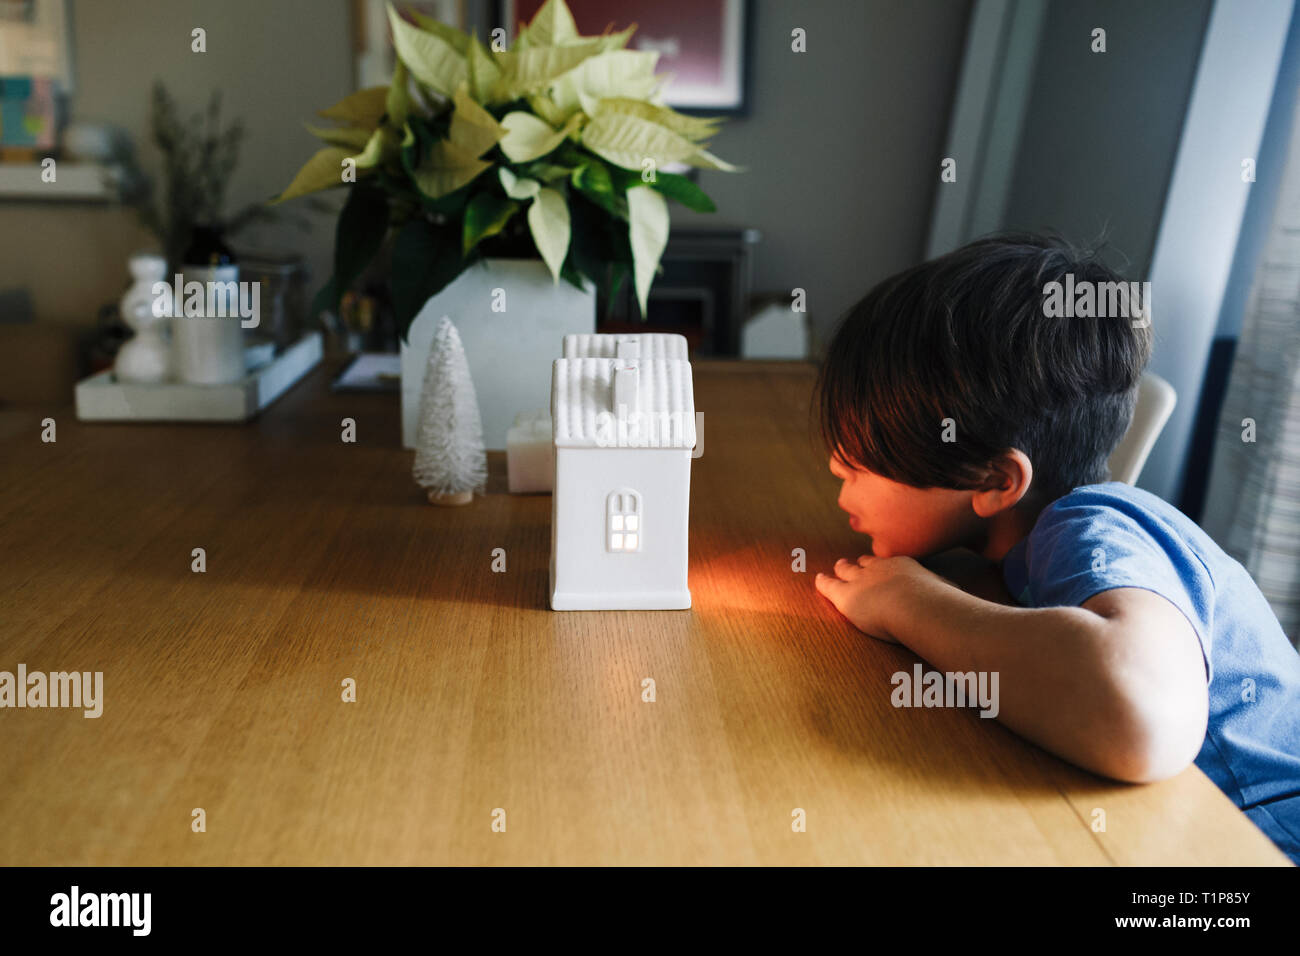 Child looking at holiday light ceramic house Stock Photo